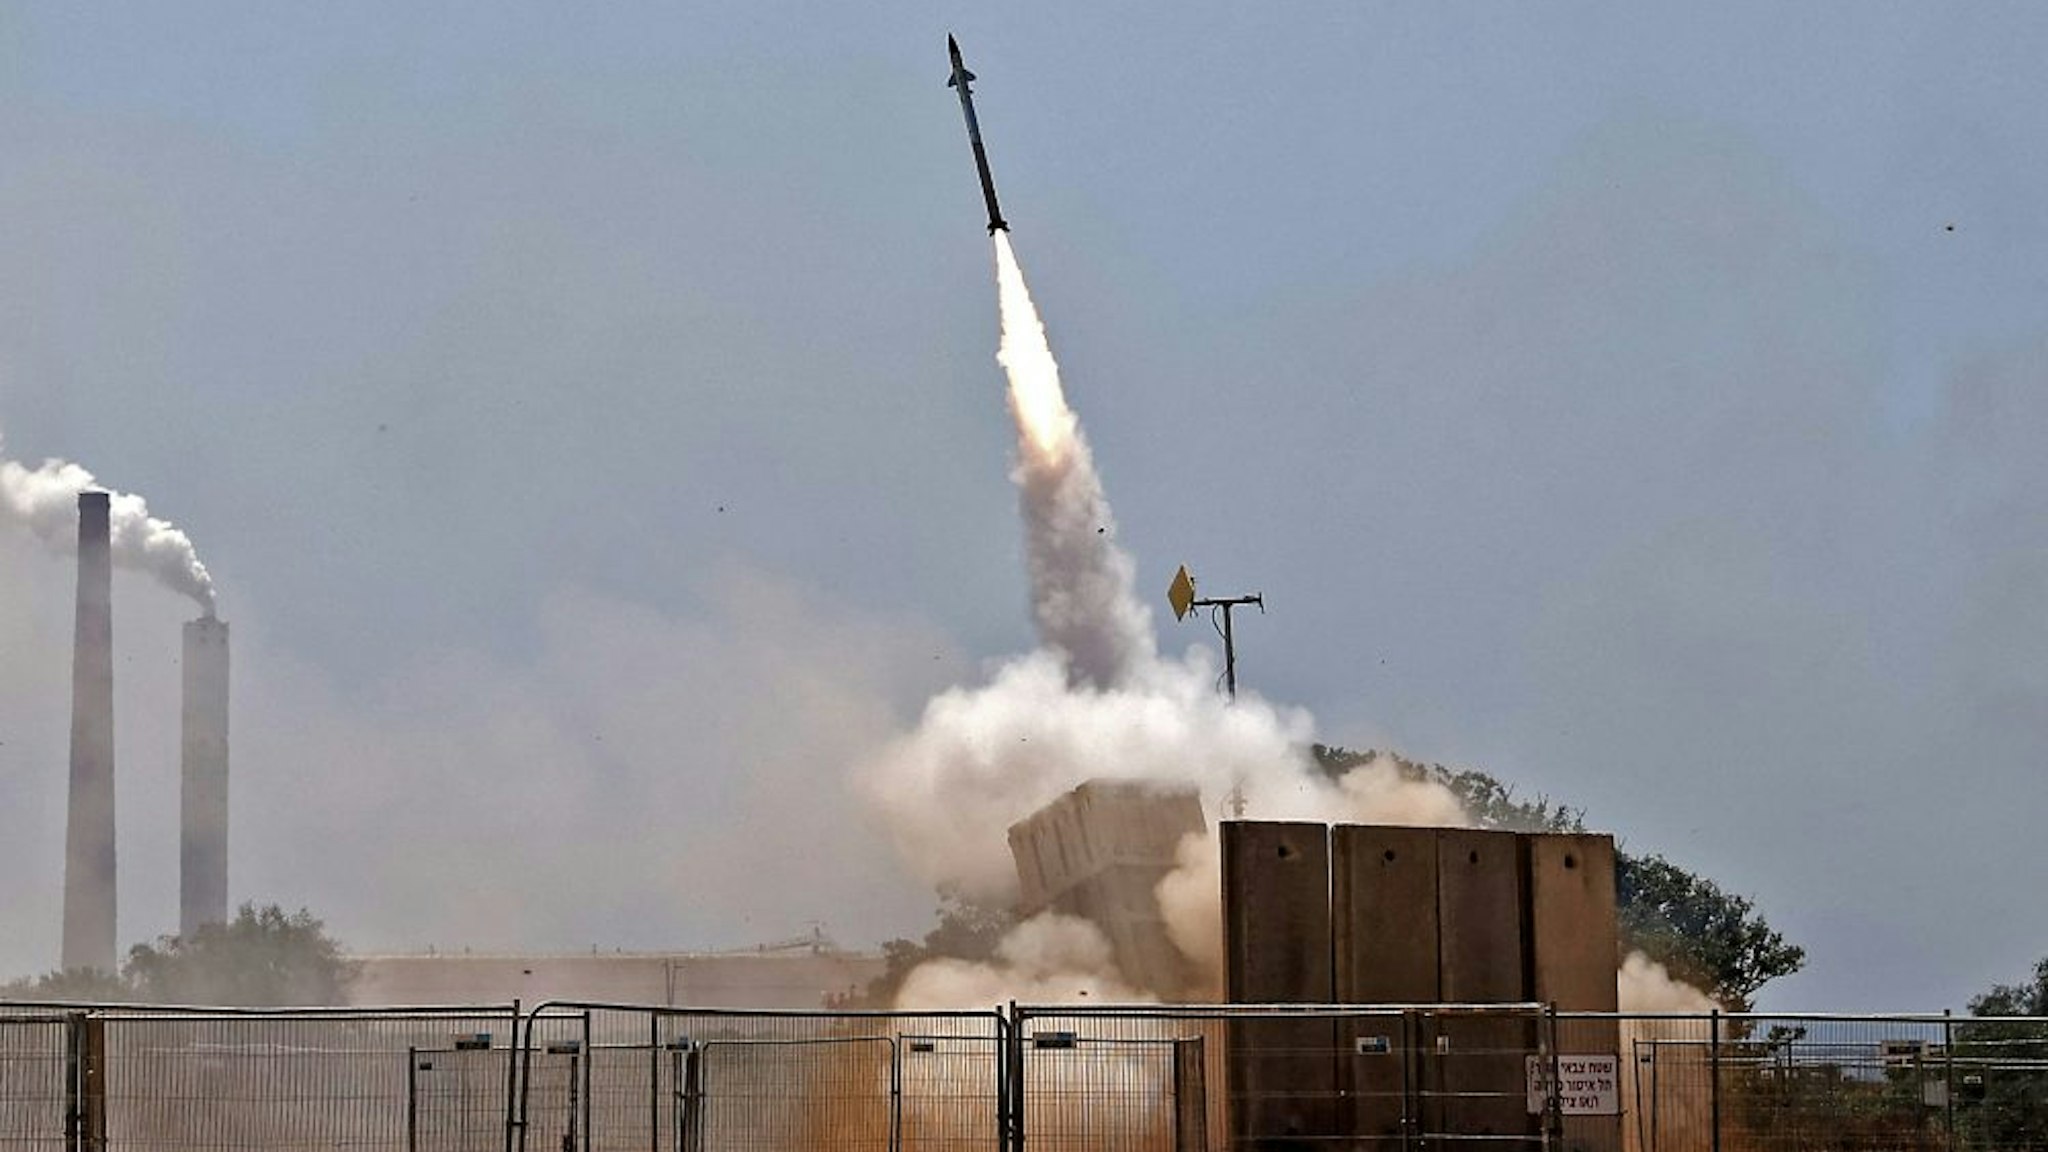 Israel's Iron Dome aerial defence system intercepts rockets launched from the Gaza Strip, controlled by the Palestinian Hamas movement, above the southern Israeli city of Ashkelon, on May 11, 2021. - Israel and Hamas exchanged heavy fire, in a dramatic escalation between the bitter foes sparked by unrest at Jerusalem's flashpoint Al-Aqsa Mosque compound.